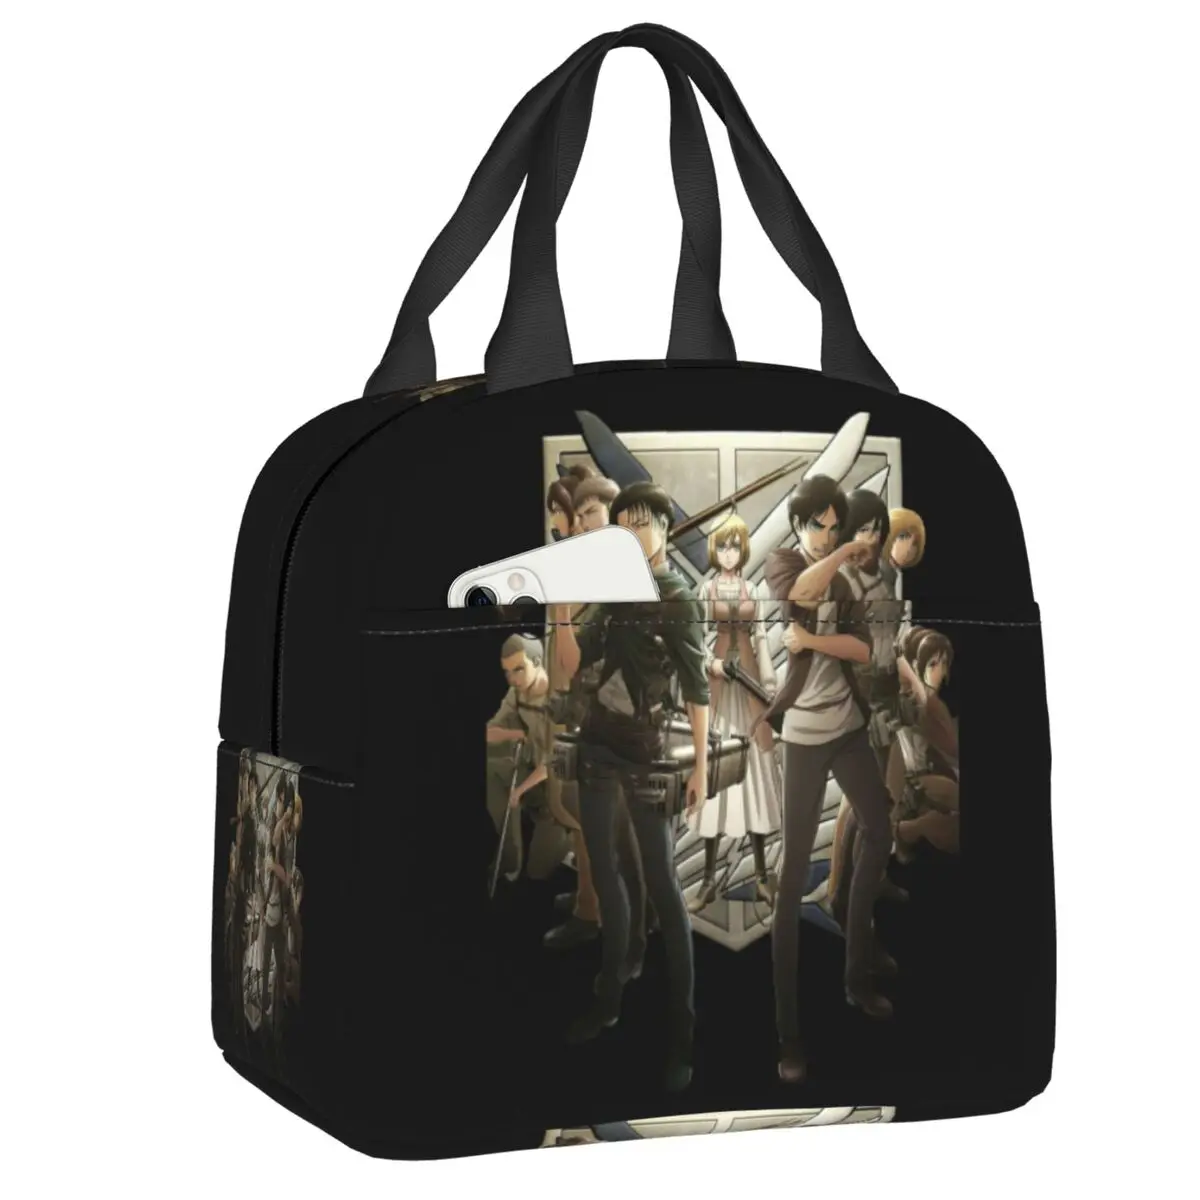 

Attack On Titan Resuable Lunch Box for Women Anime Manga Shingeki no Kyojin Thermal Cooler Food Insulated Lunch Bag Office Work